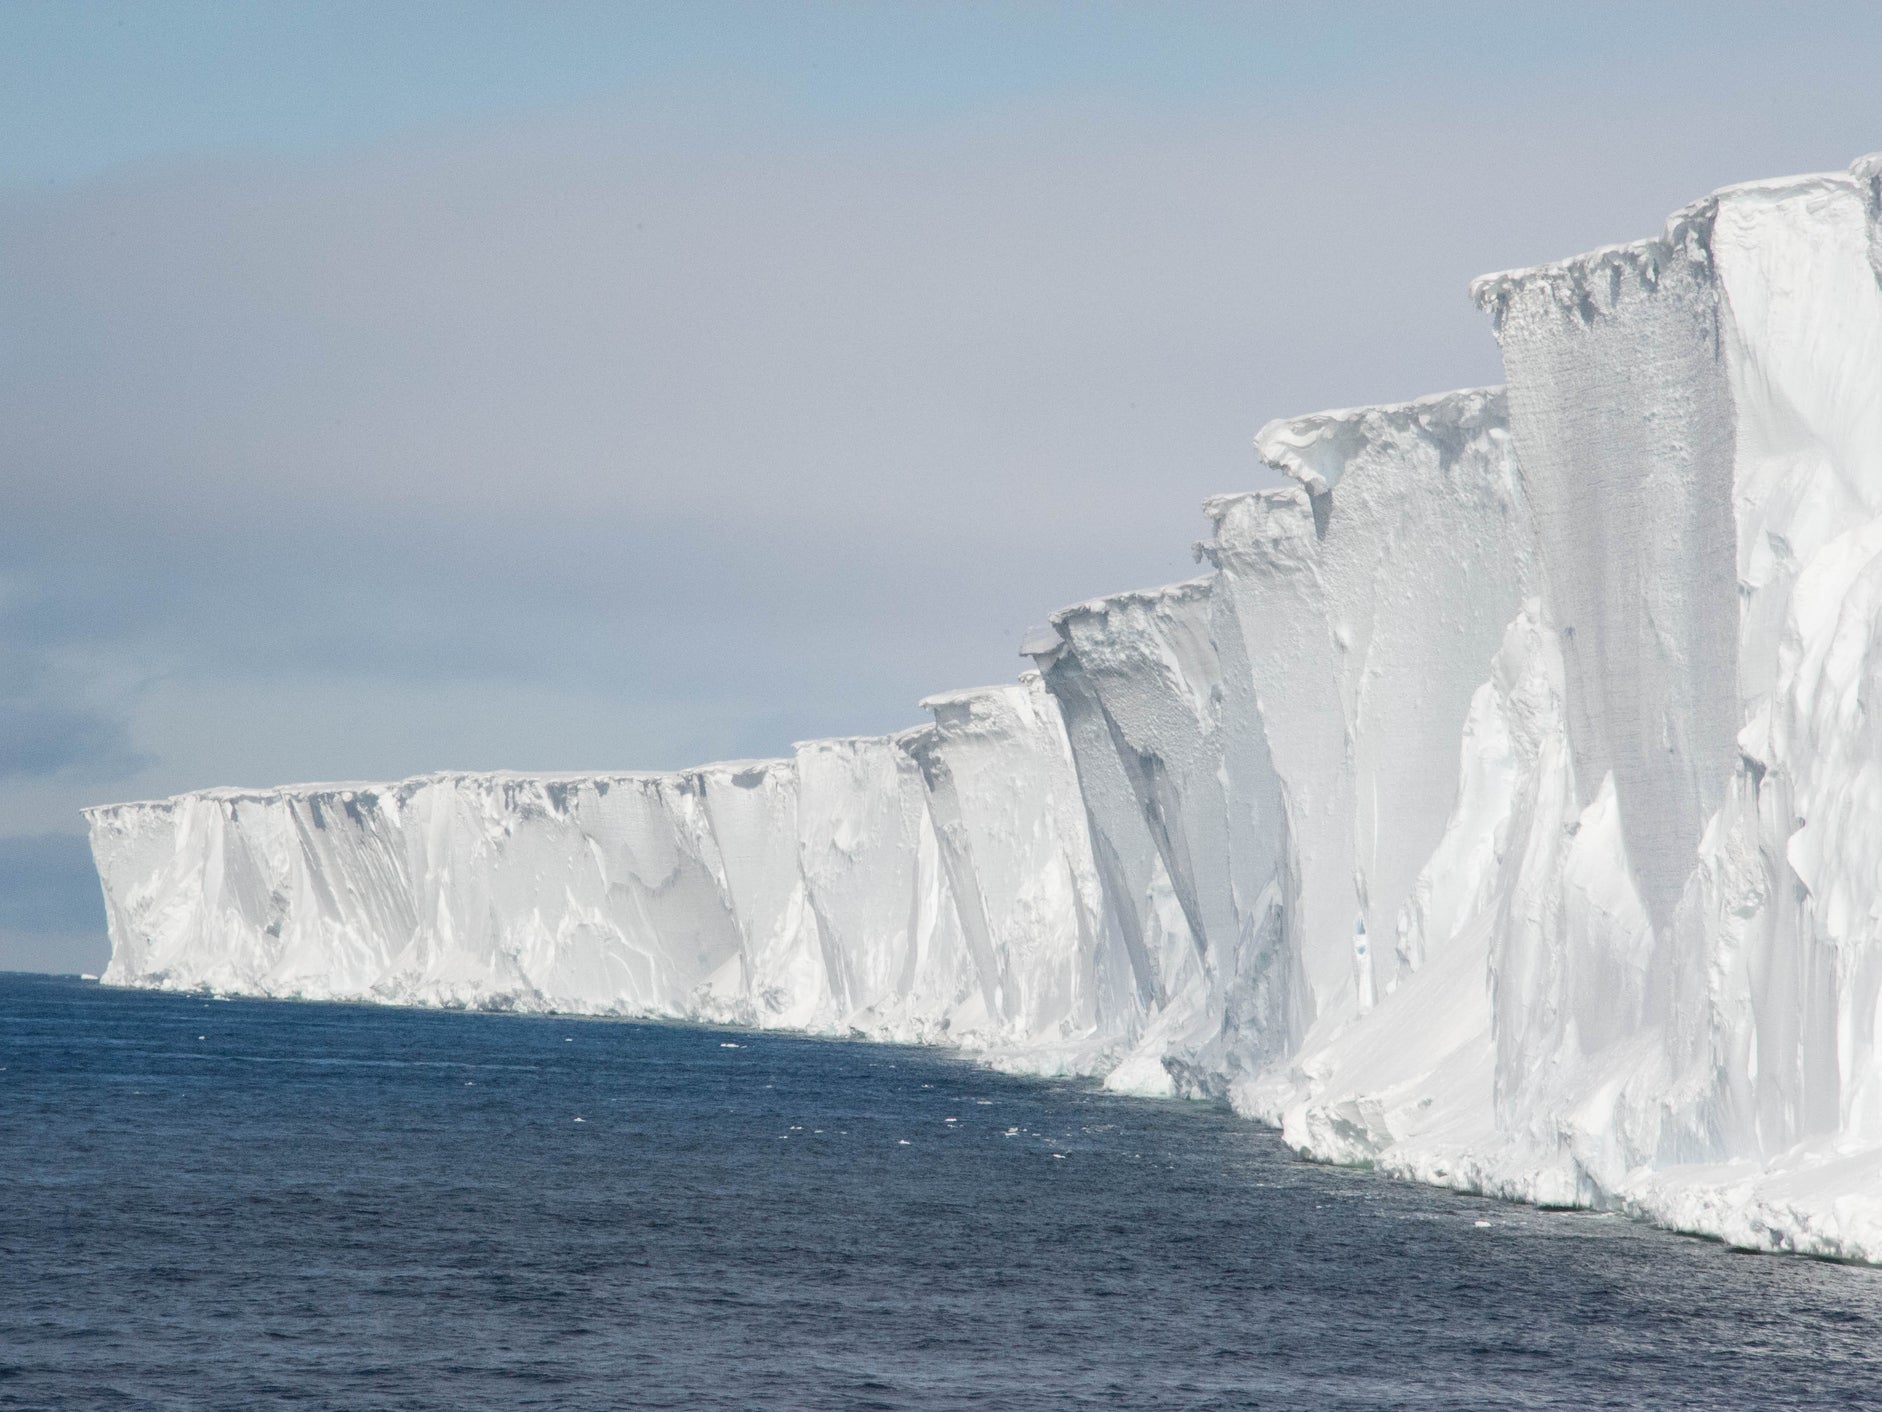 Climate crisis: Global warming could rapidly destroy Antarctic ice shelves with 'major consequences', study suggests